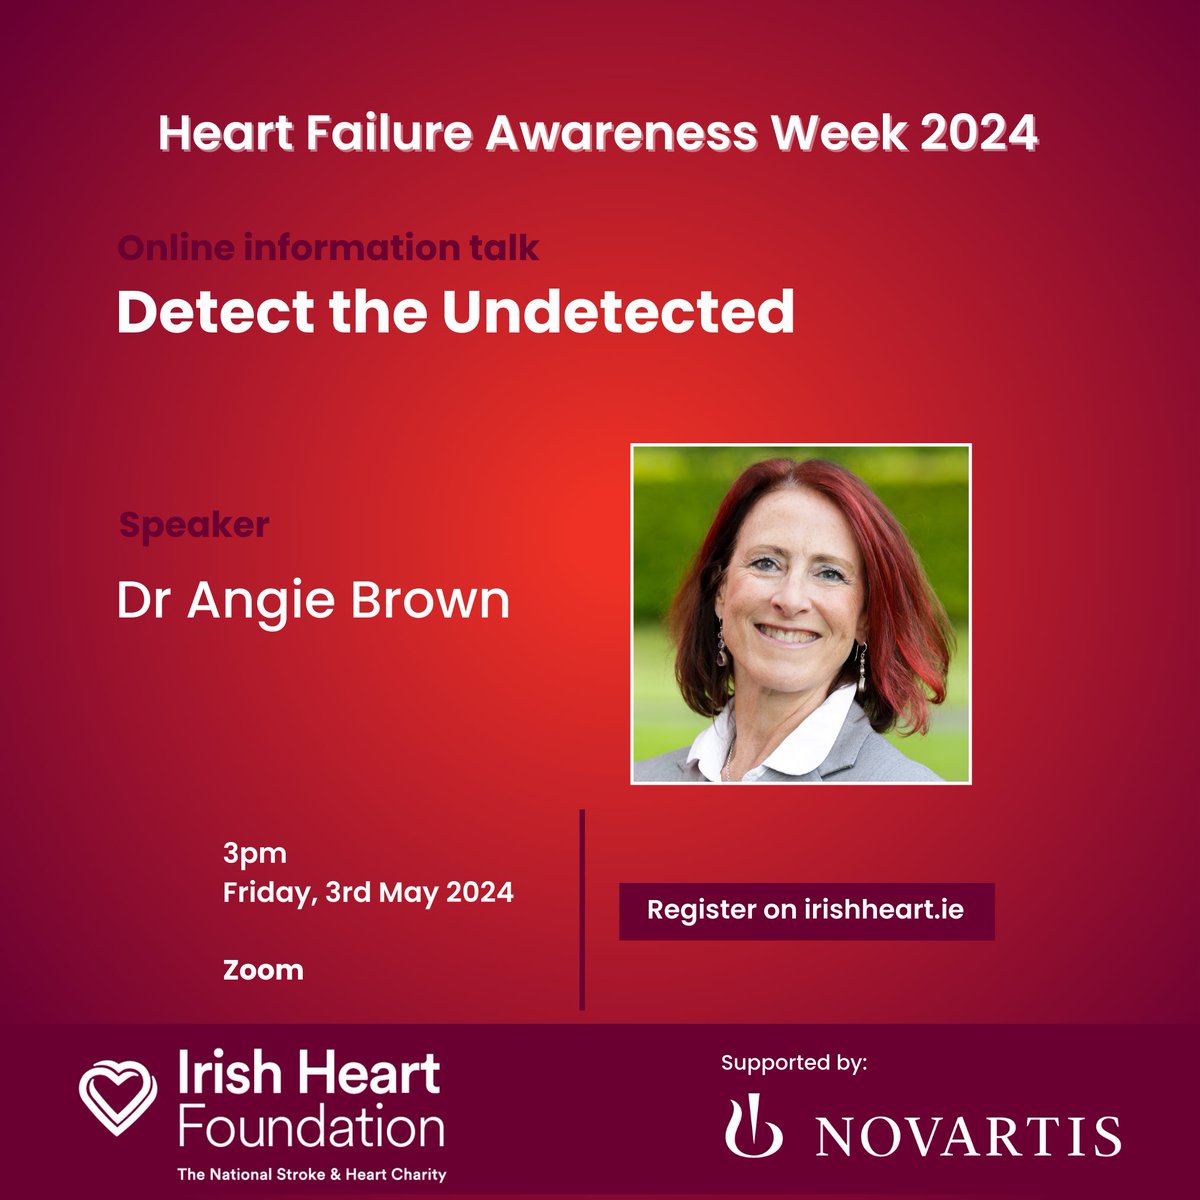 This Friday, May 3rd, join Dr Angie Brown during #HeartFailureAwarenessWeek to learn about the symptoms of heart failure and understand how and when to voice your concern with your doctor #DetecttheUndetected Register here: tinyurl.com/3566u3cm